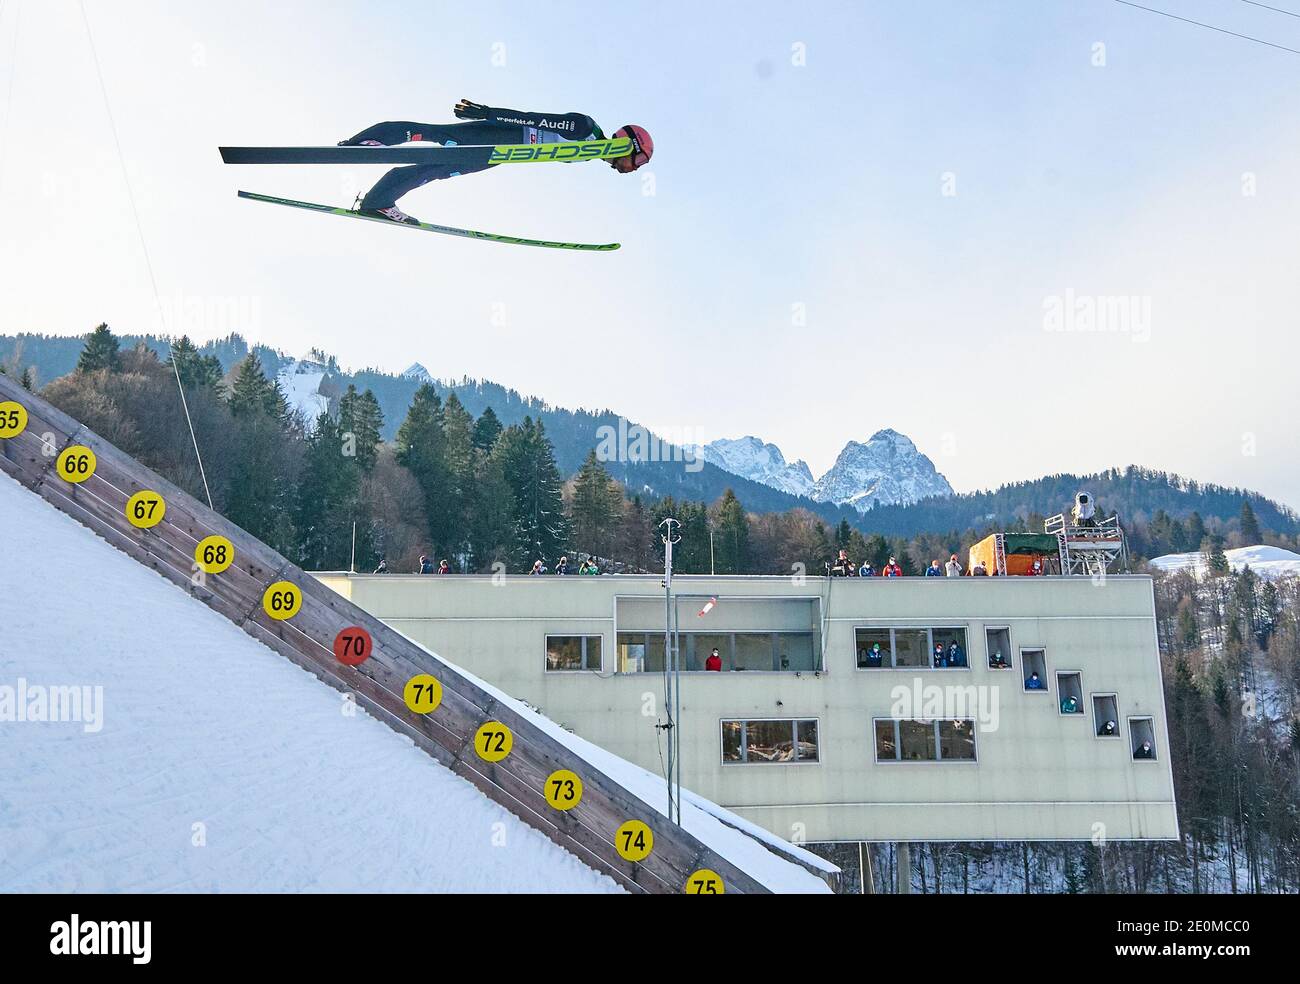 Pius PASCHKE, GER in action  in front of Zugspitze mountain at the Four Hills Tournament Ski Jumping at Olympic Stadium, Grosse Olympiaschanze in Garmisch-Partenkirchen, Bavaria, Germany, January 01, 2021.  © Peter Schatz / Alamy Live News Stock Photo